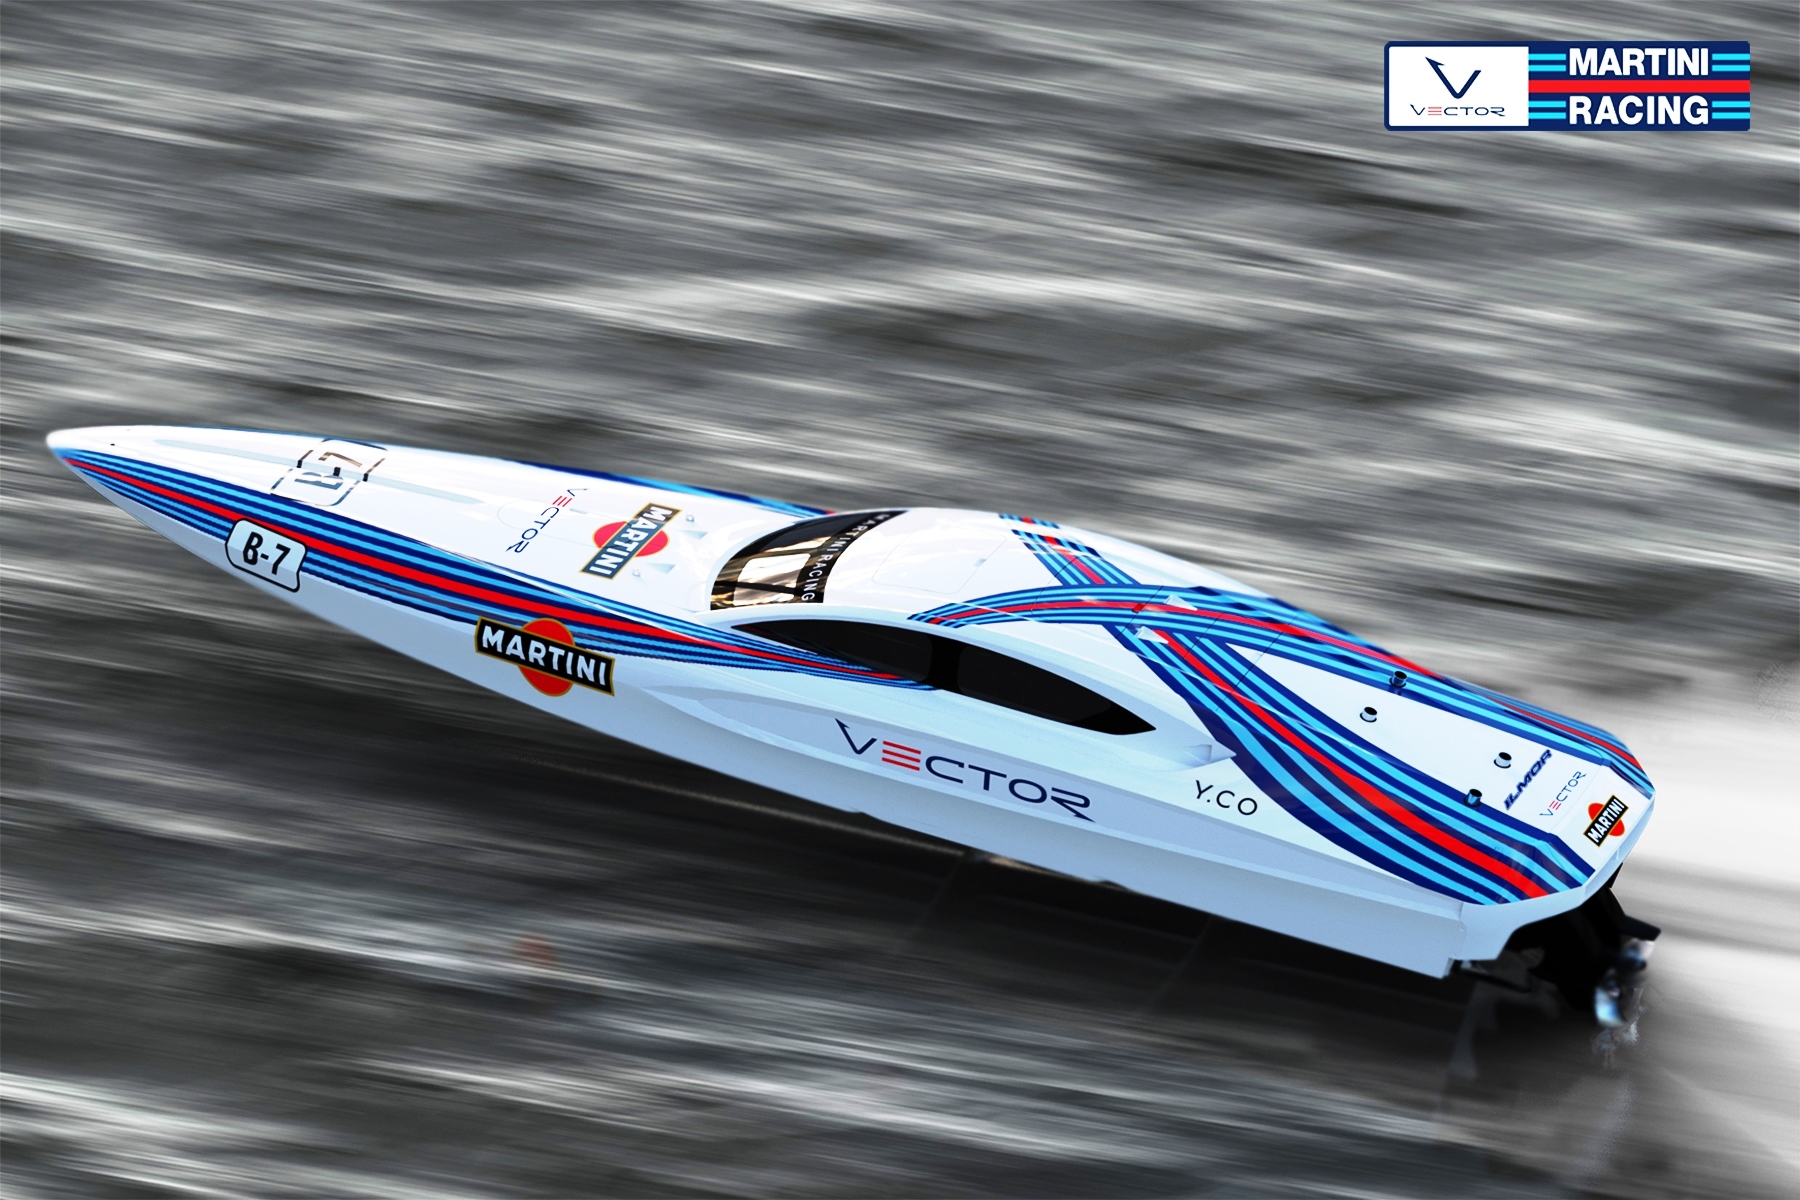  two decades Martini rejoins the world of competitive power boating